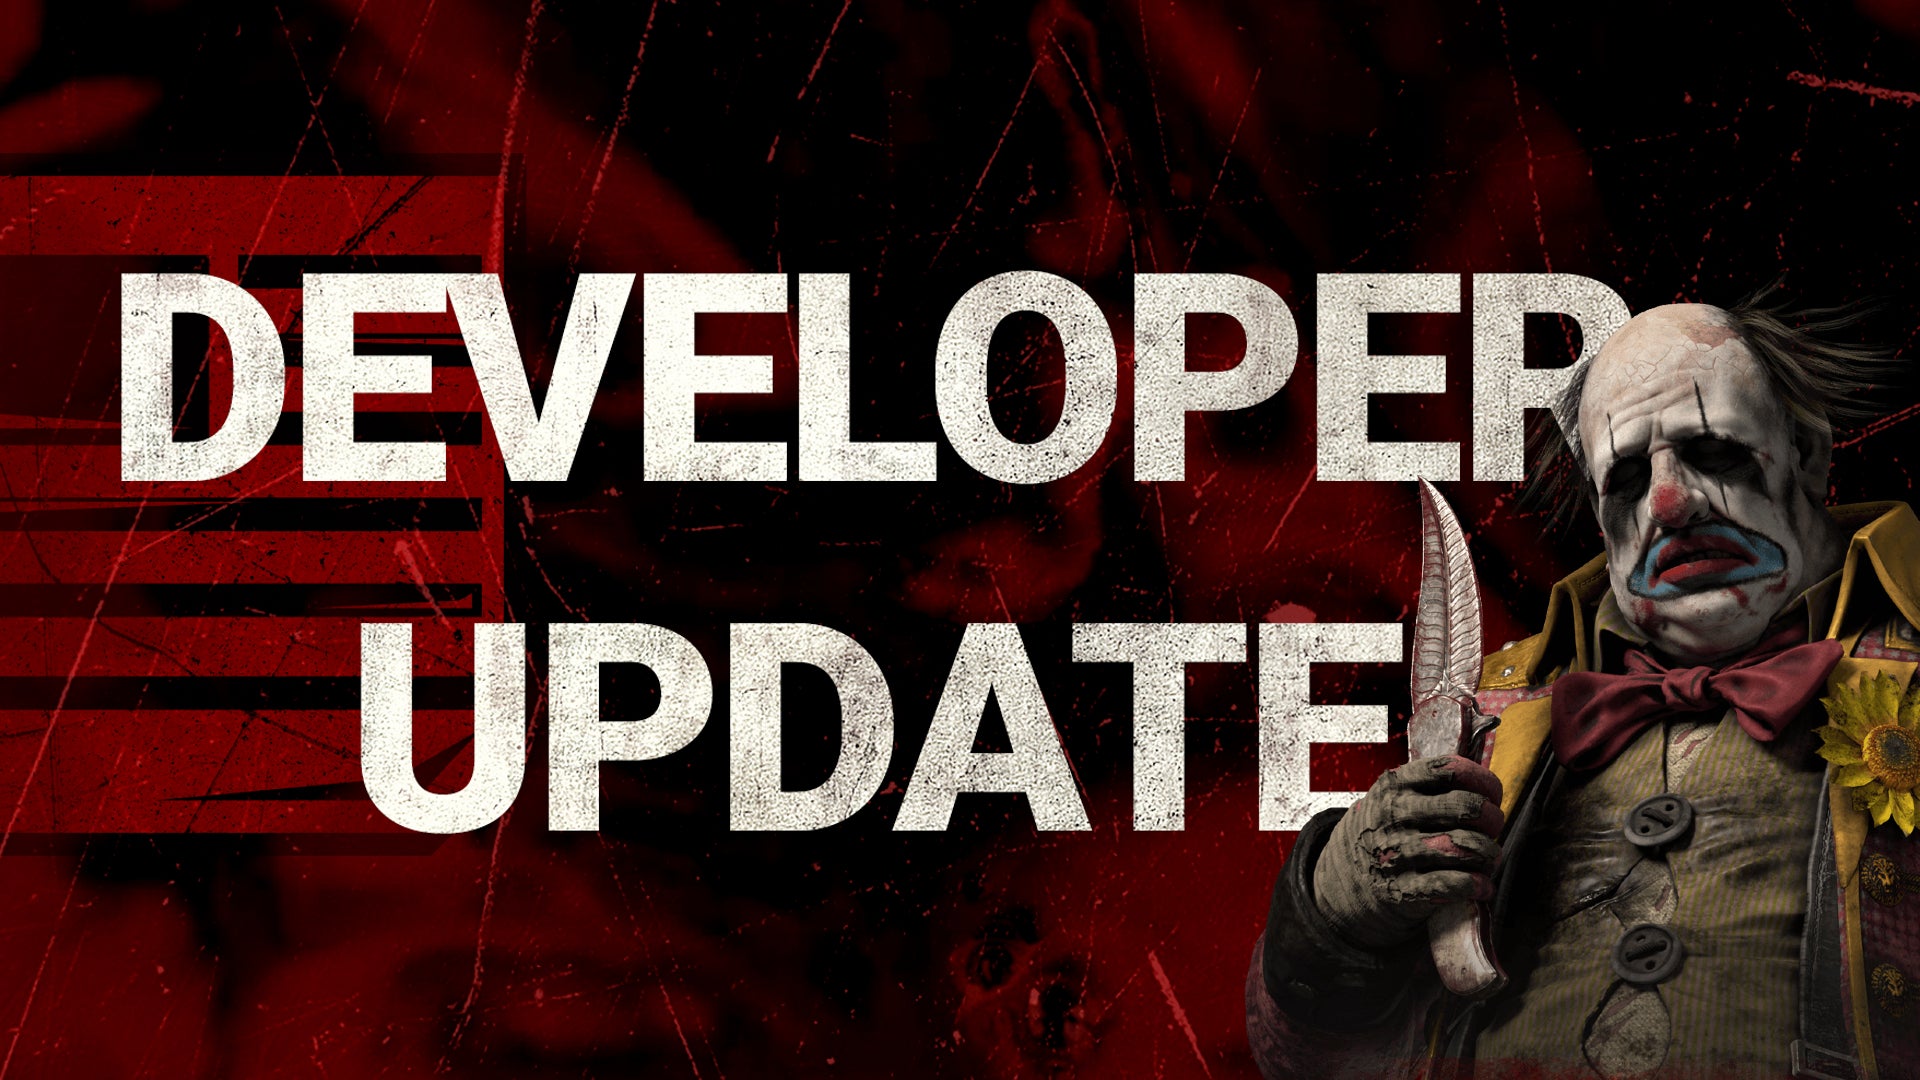 The Dead by Daylight Developer Update image is accompanied by killer, The Clown.